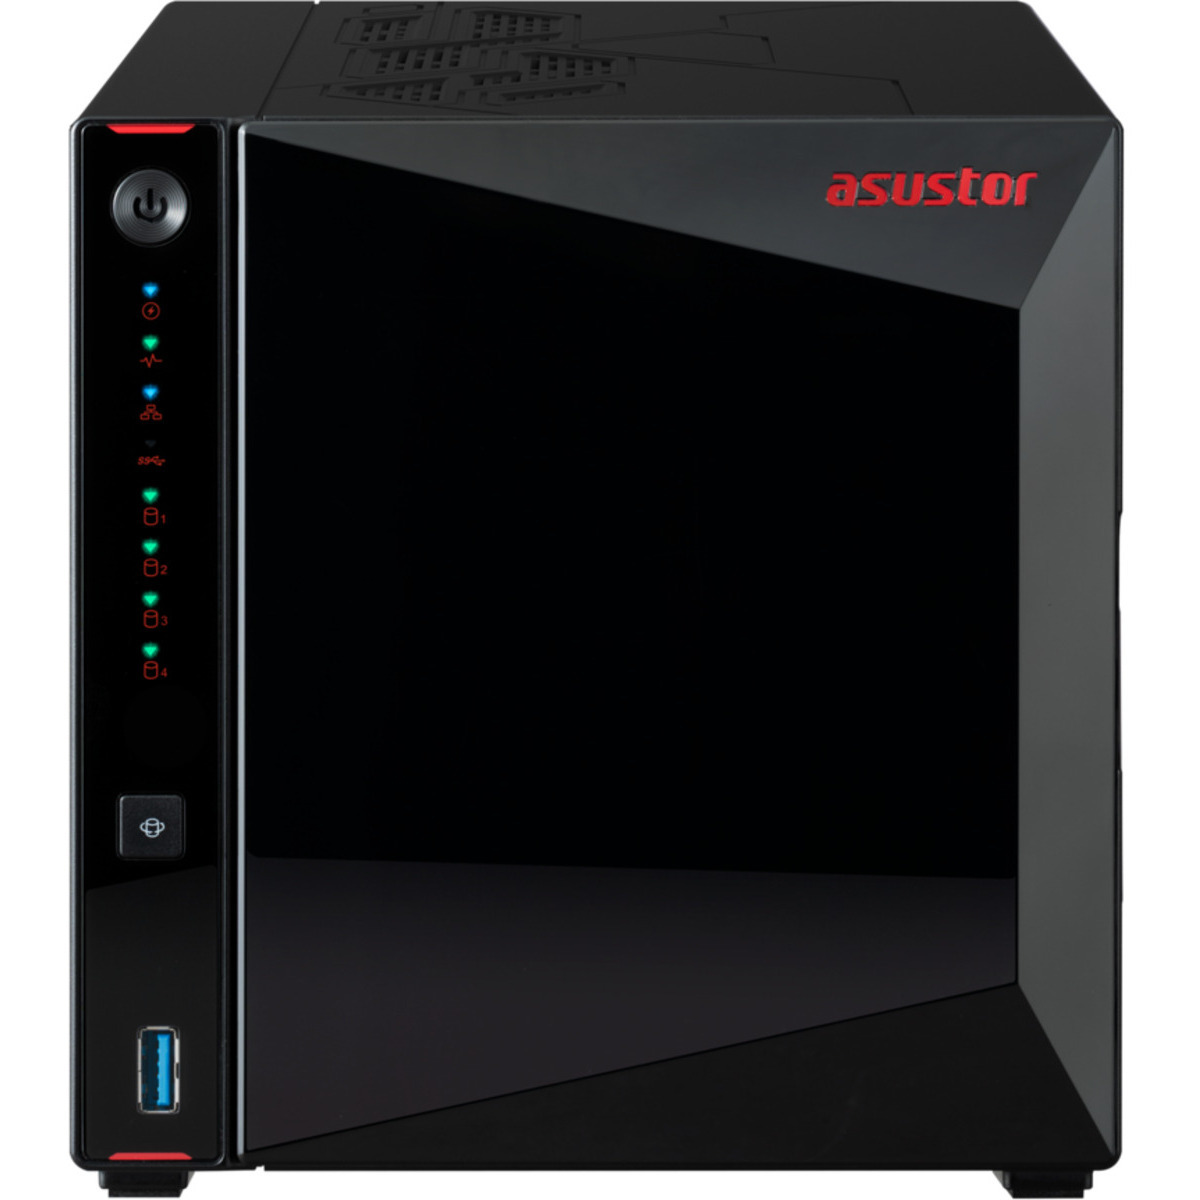 buy $2478 ASUSTOR Nimbustor 4 Gen2 AS5404T 32tb Desktop NAS - Network Attached Storage Device 4x8000gb Samsung 870 QVO MZ-77Q8T0 2.5 560/530MB/s SATA 6Gb/s SSD CONSUMER Class Drives Installed - Burn-In Tested - ON SALE - FREE RAM UPGRADE - nas headquarters buy network attached storage server device das new raid-5 free shipping simply usa Nimbustor 4 Gen2 AS5404T